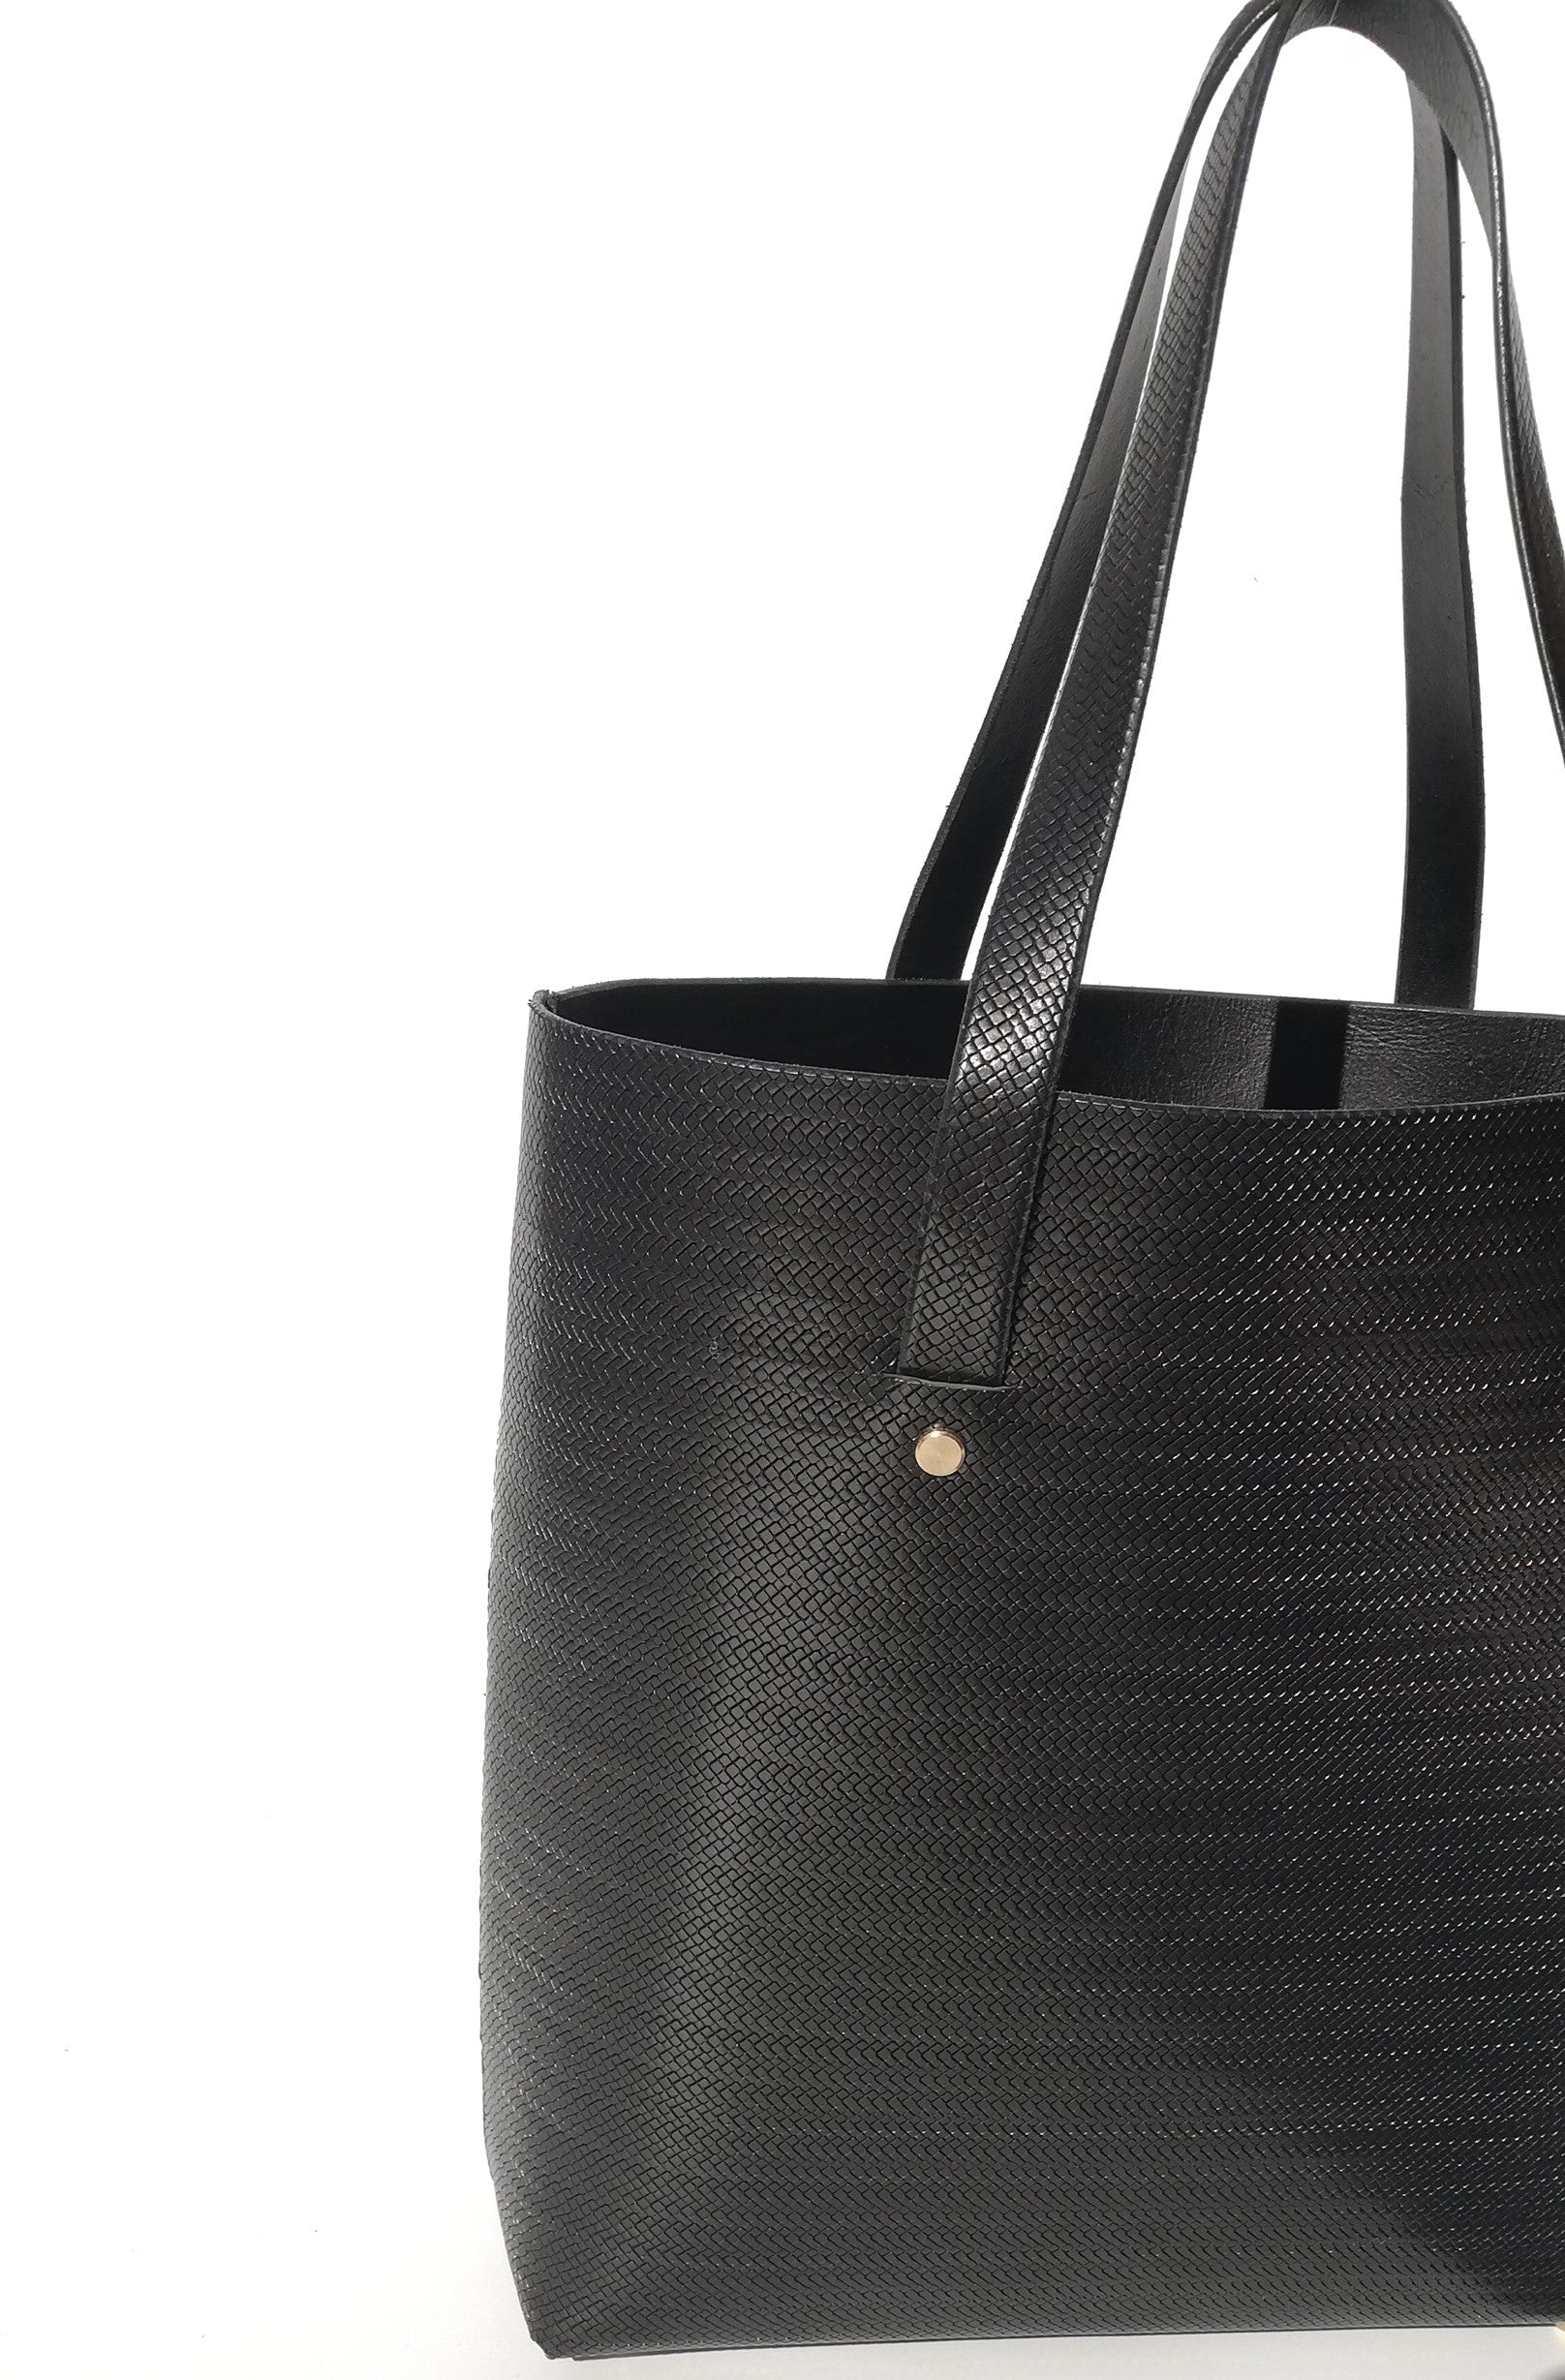 Seconds- Handmade leather Black Tote Bag - Cut Weave